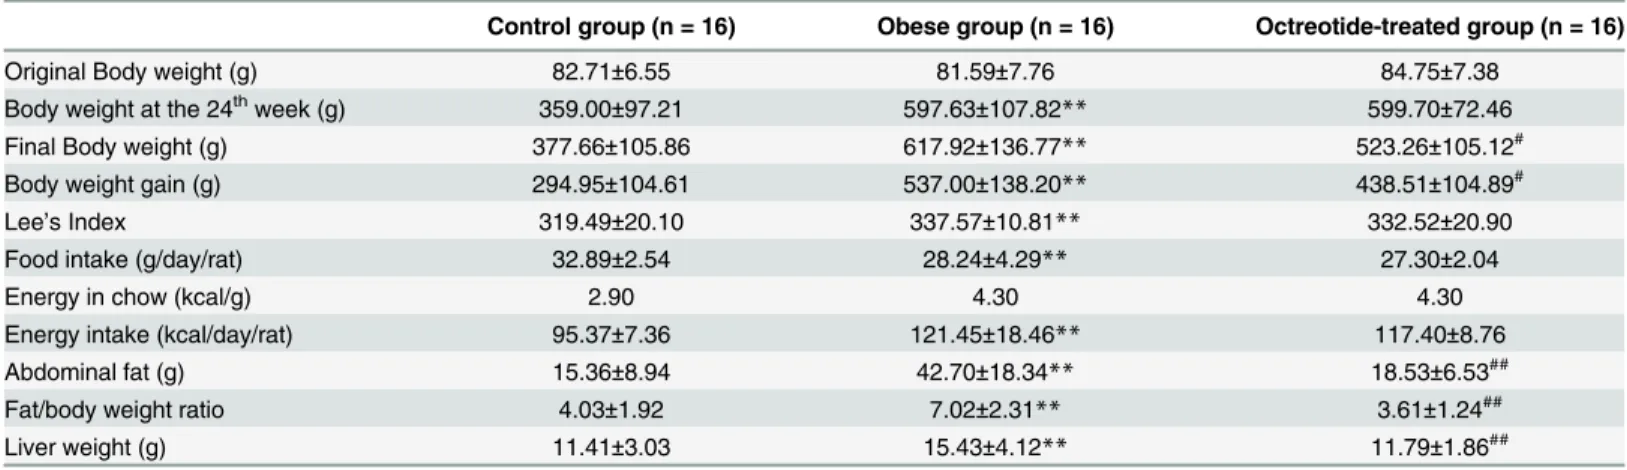 Table 2. The food intake, body weight and parameters associated with obesity in each group.